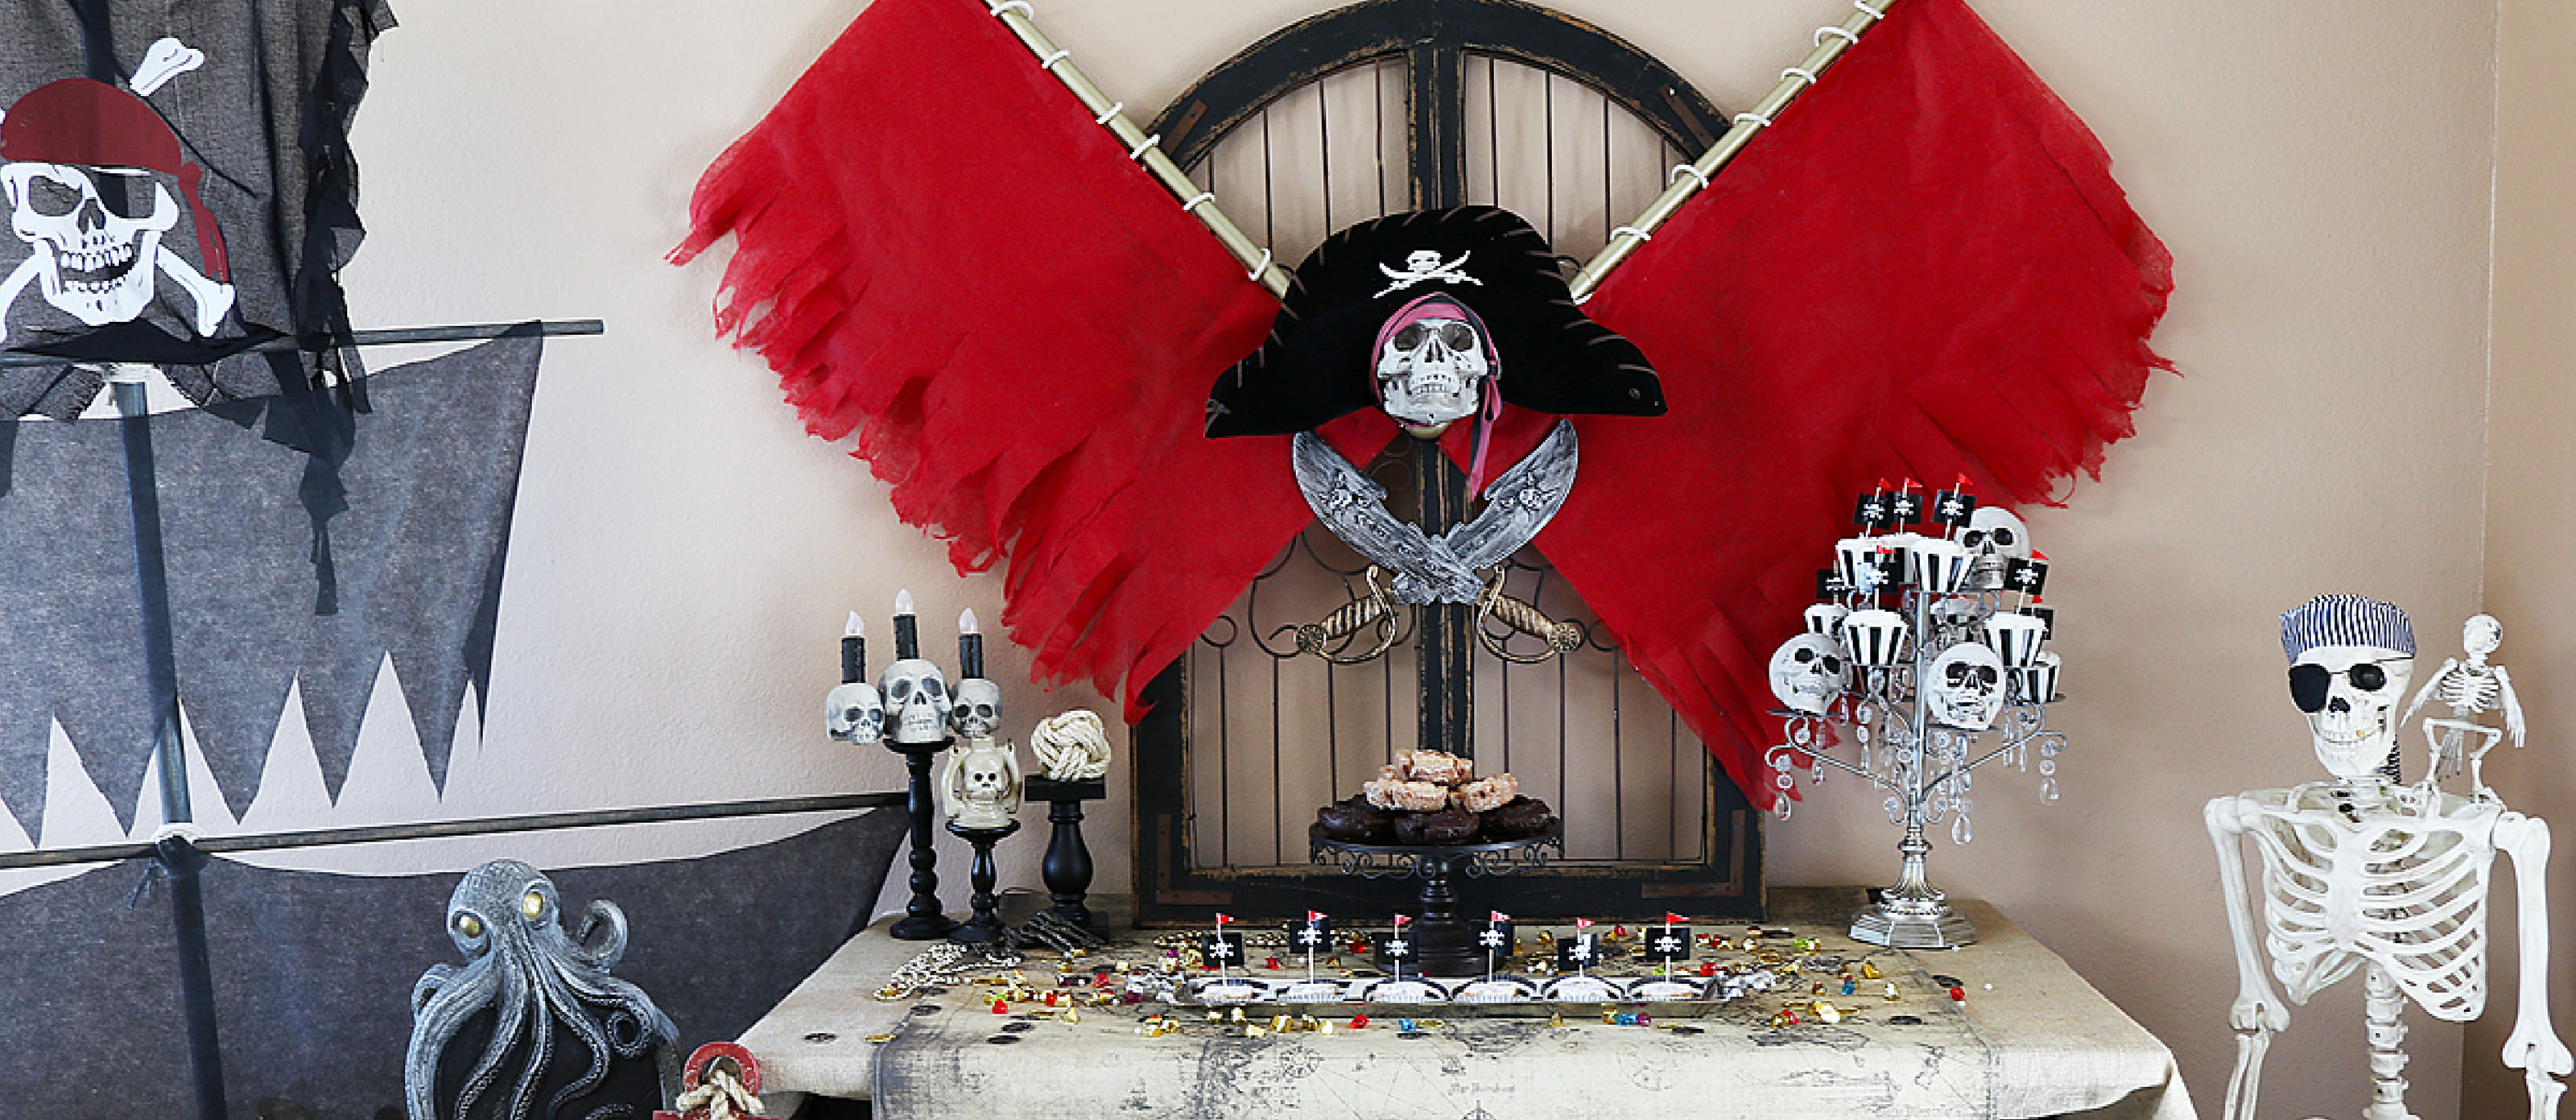 Pirate Ceiling Caribbean Theme Birthday Party InstaView Wall Decoration 